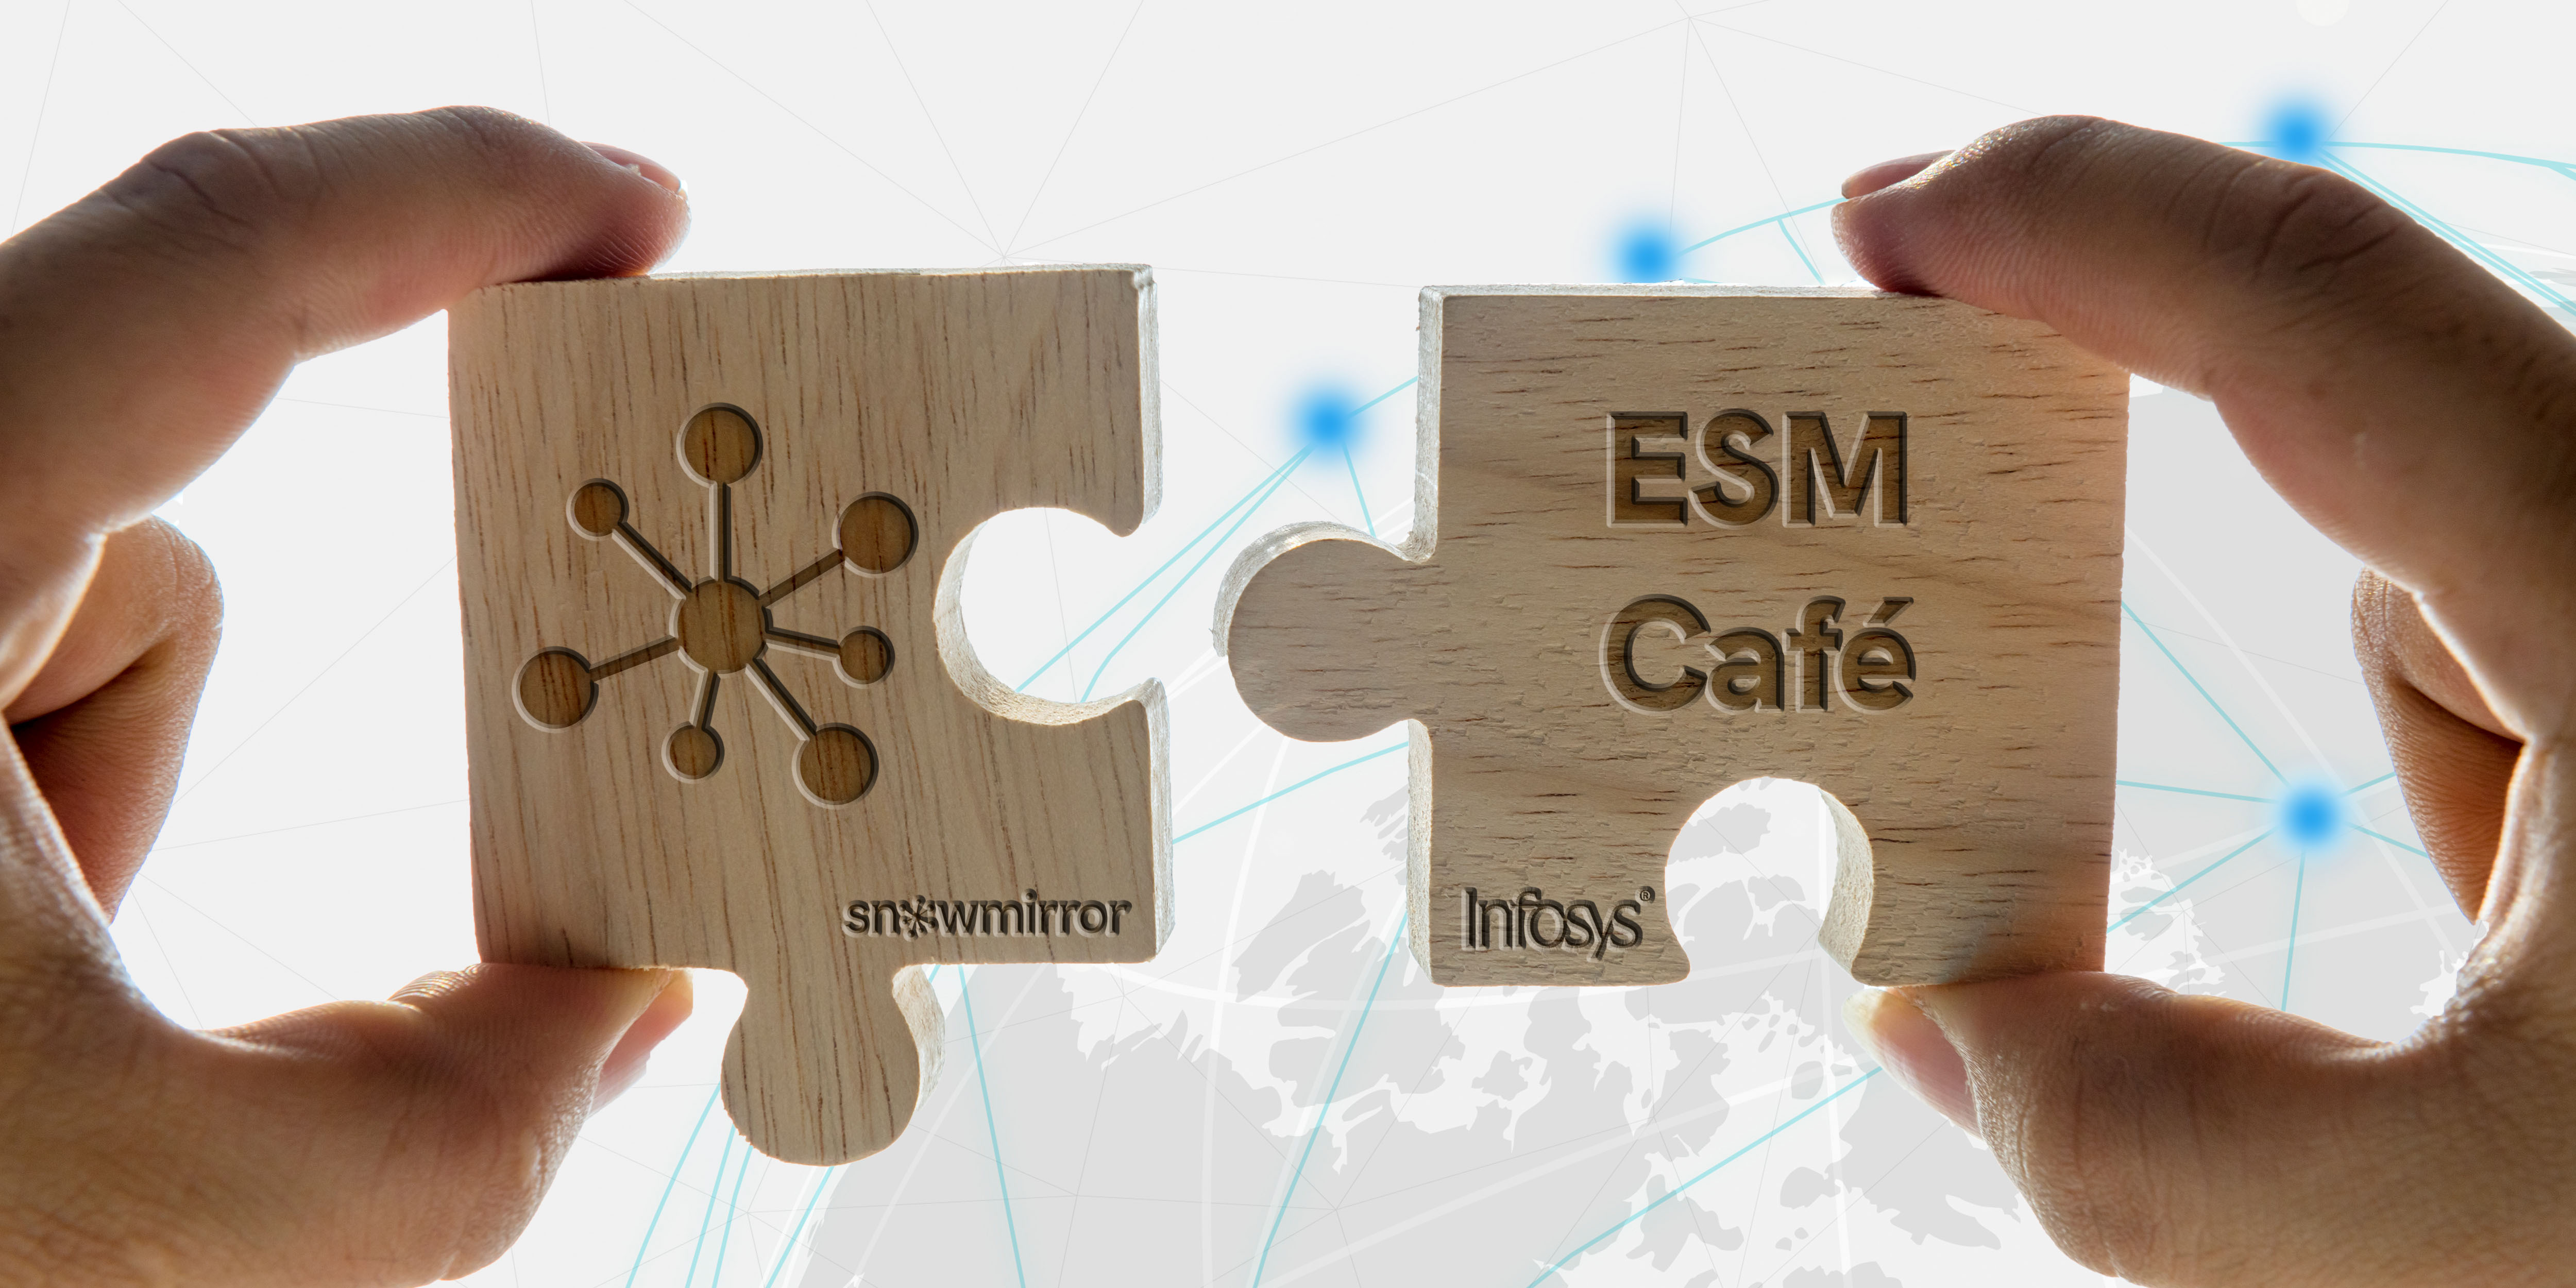 SnowMirror is now offered as part of Infosys' Enterprise Service Management Cafe.